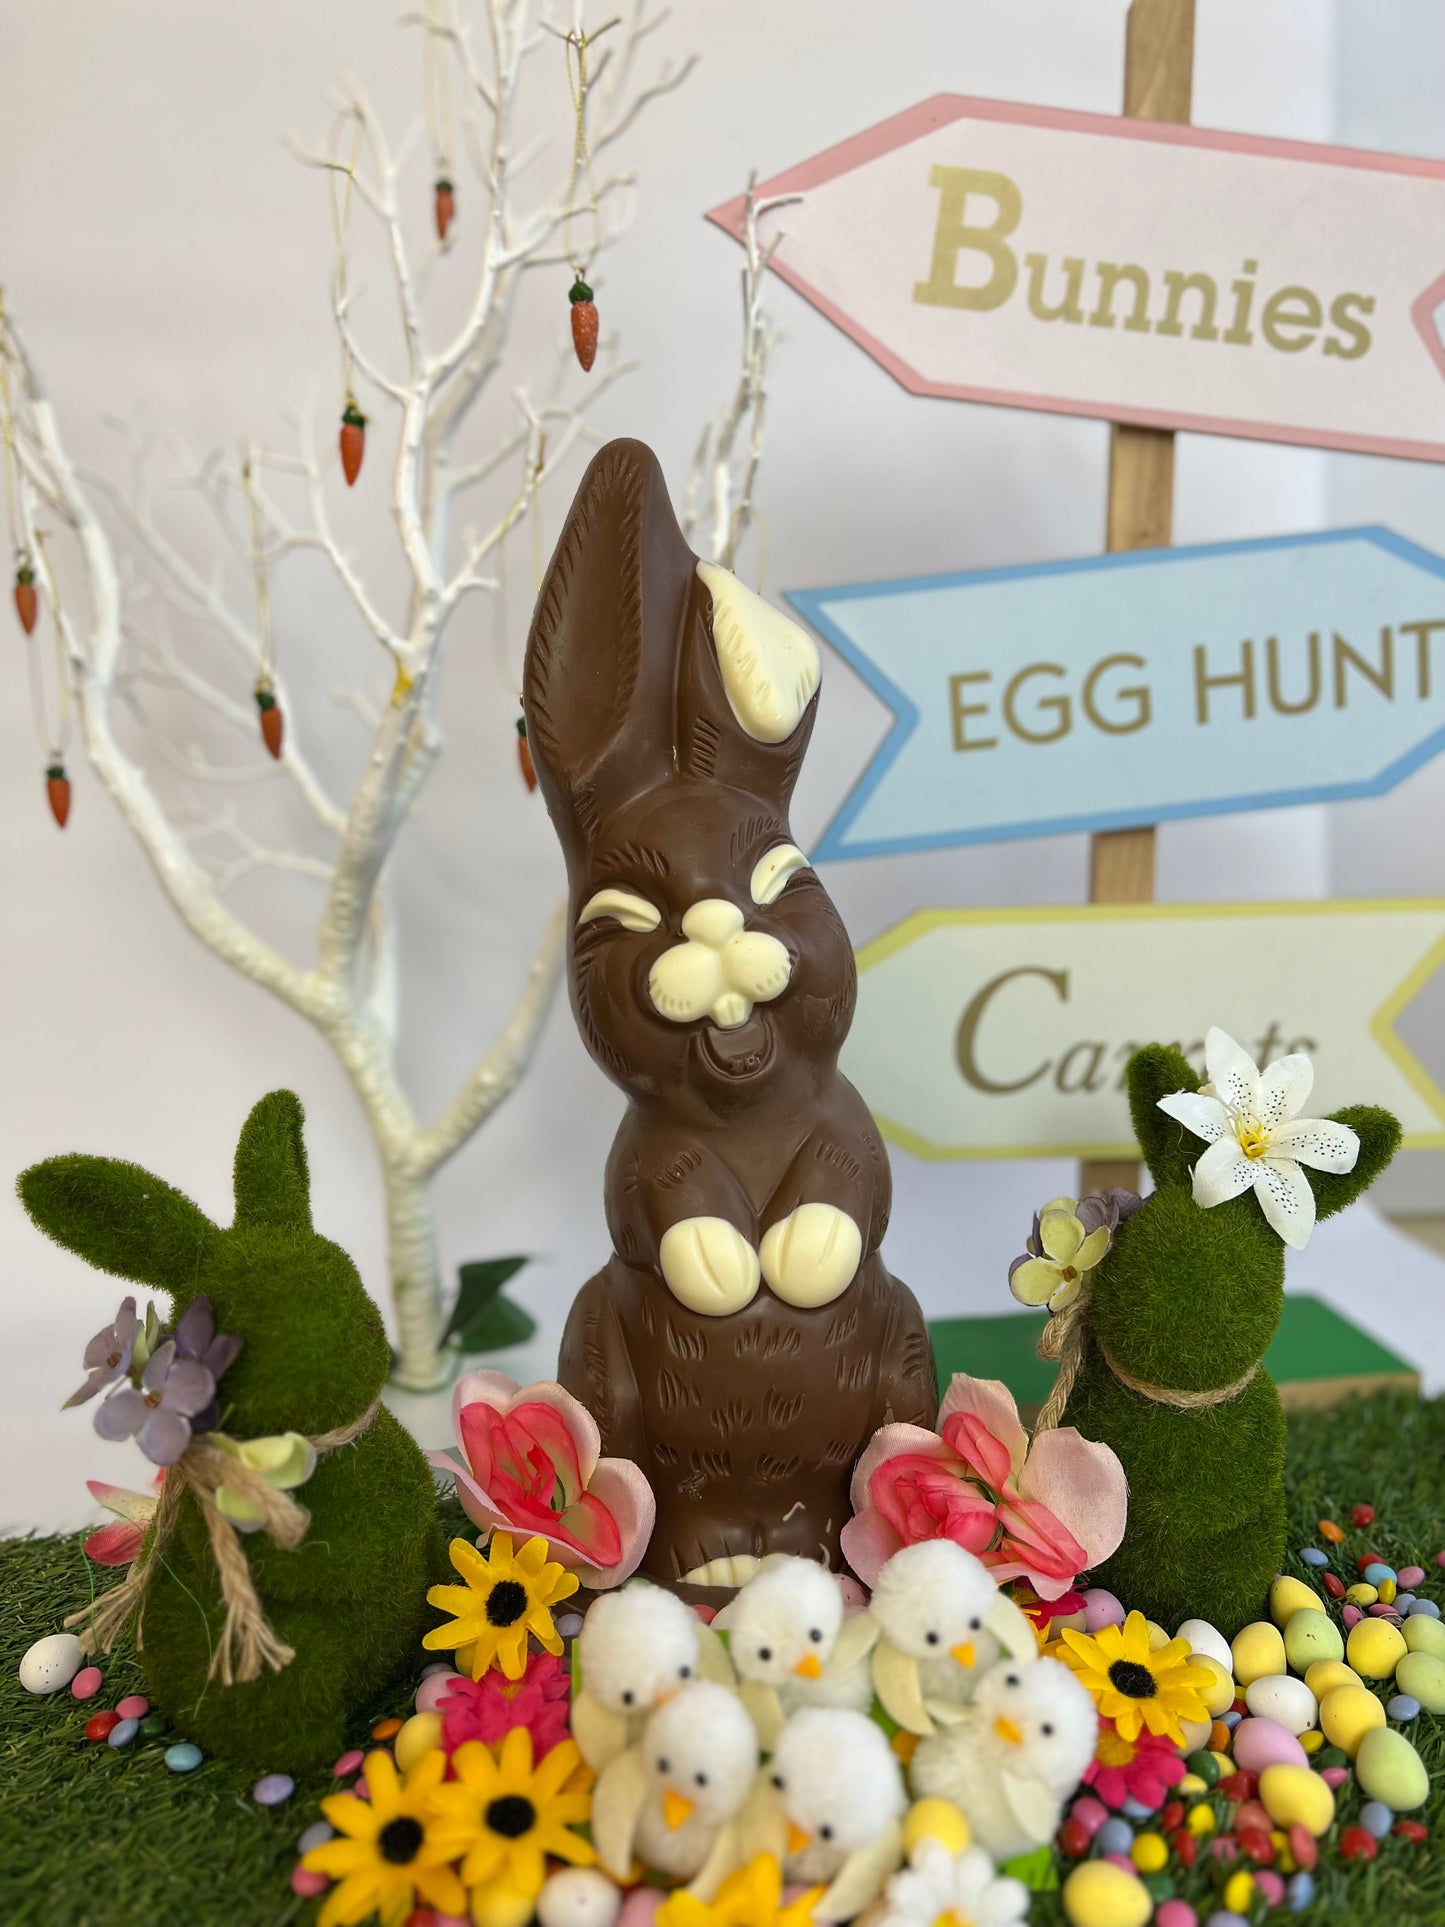 Large Milk Chocolate Easter Bunny, 800g - 15 inches tall